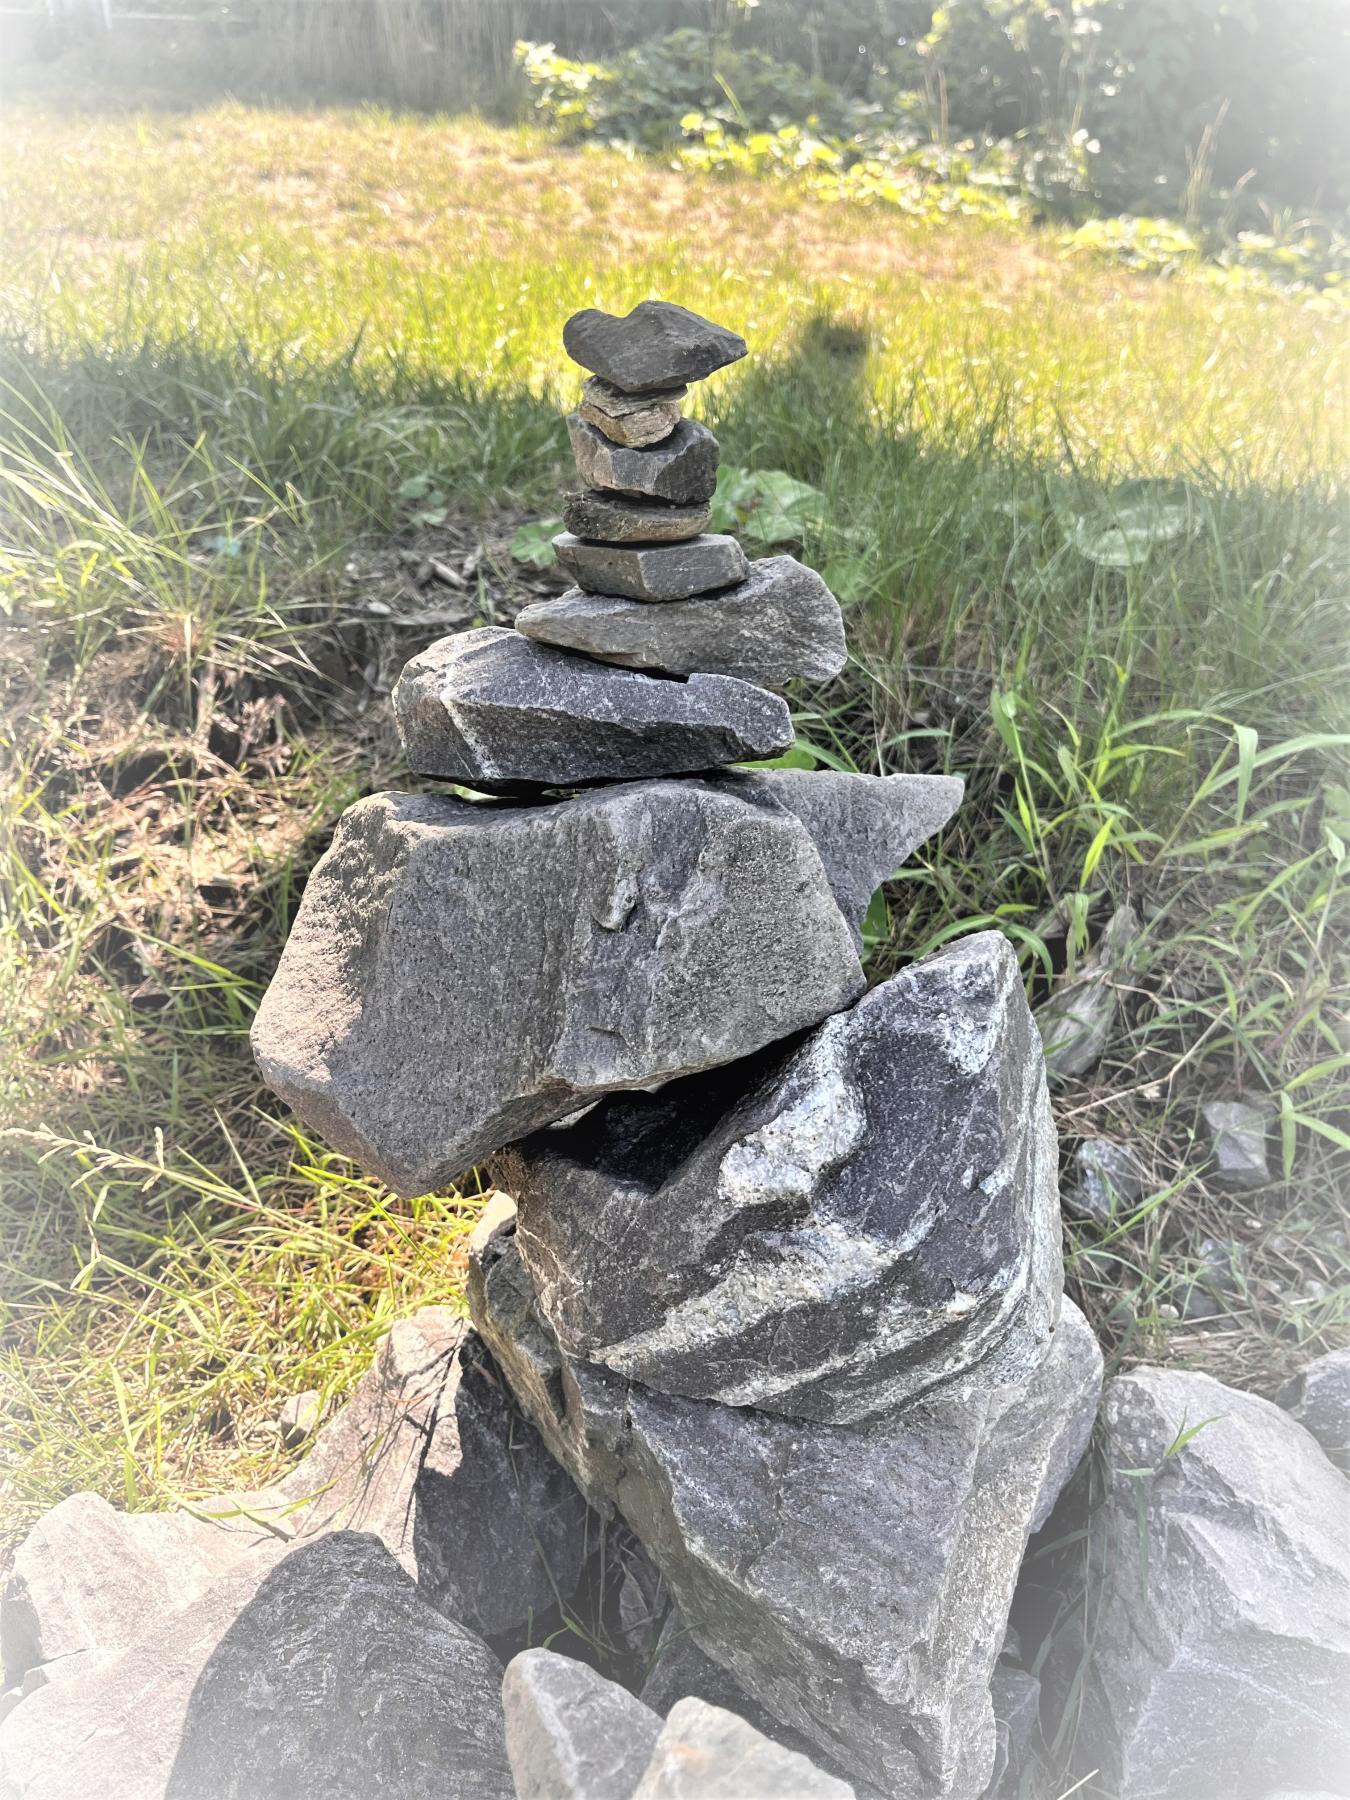 stones stacked by size on grass